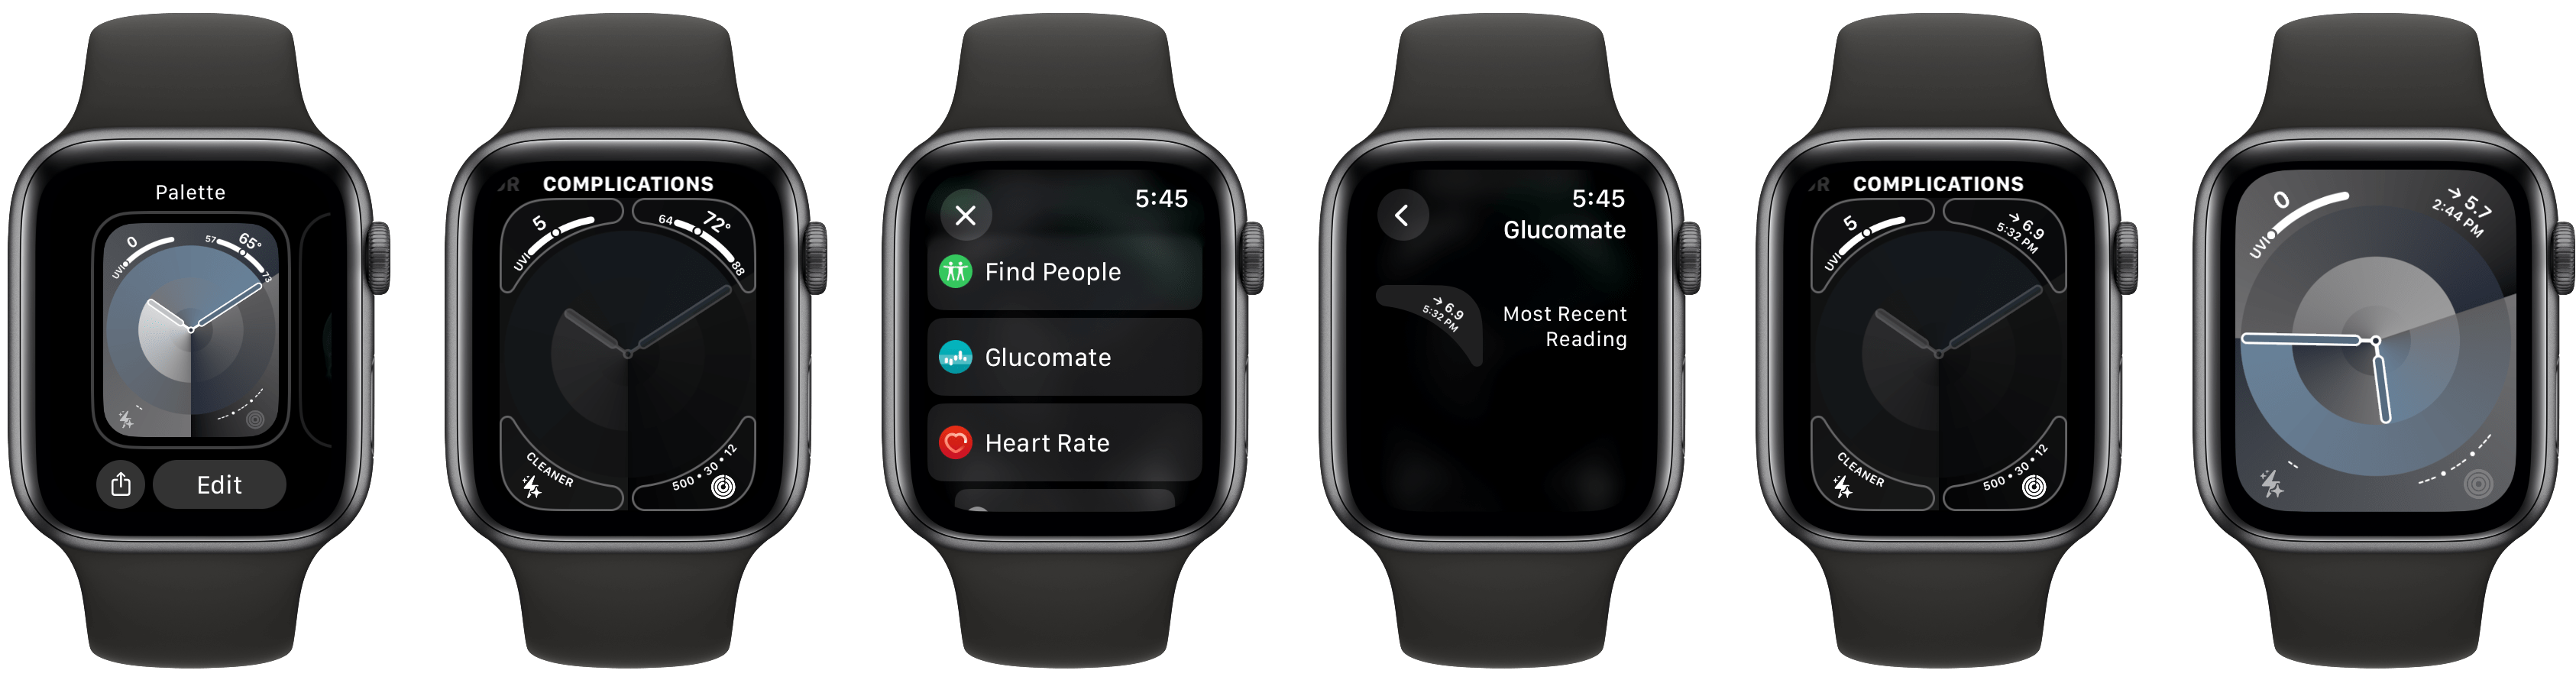 6 screenshots of Apple Watches showing the individual steps for adding a complication to the watch face